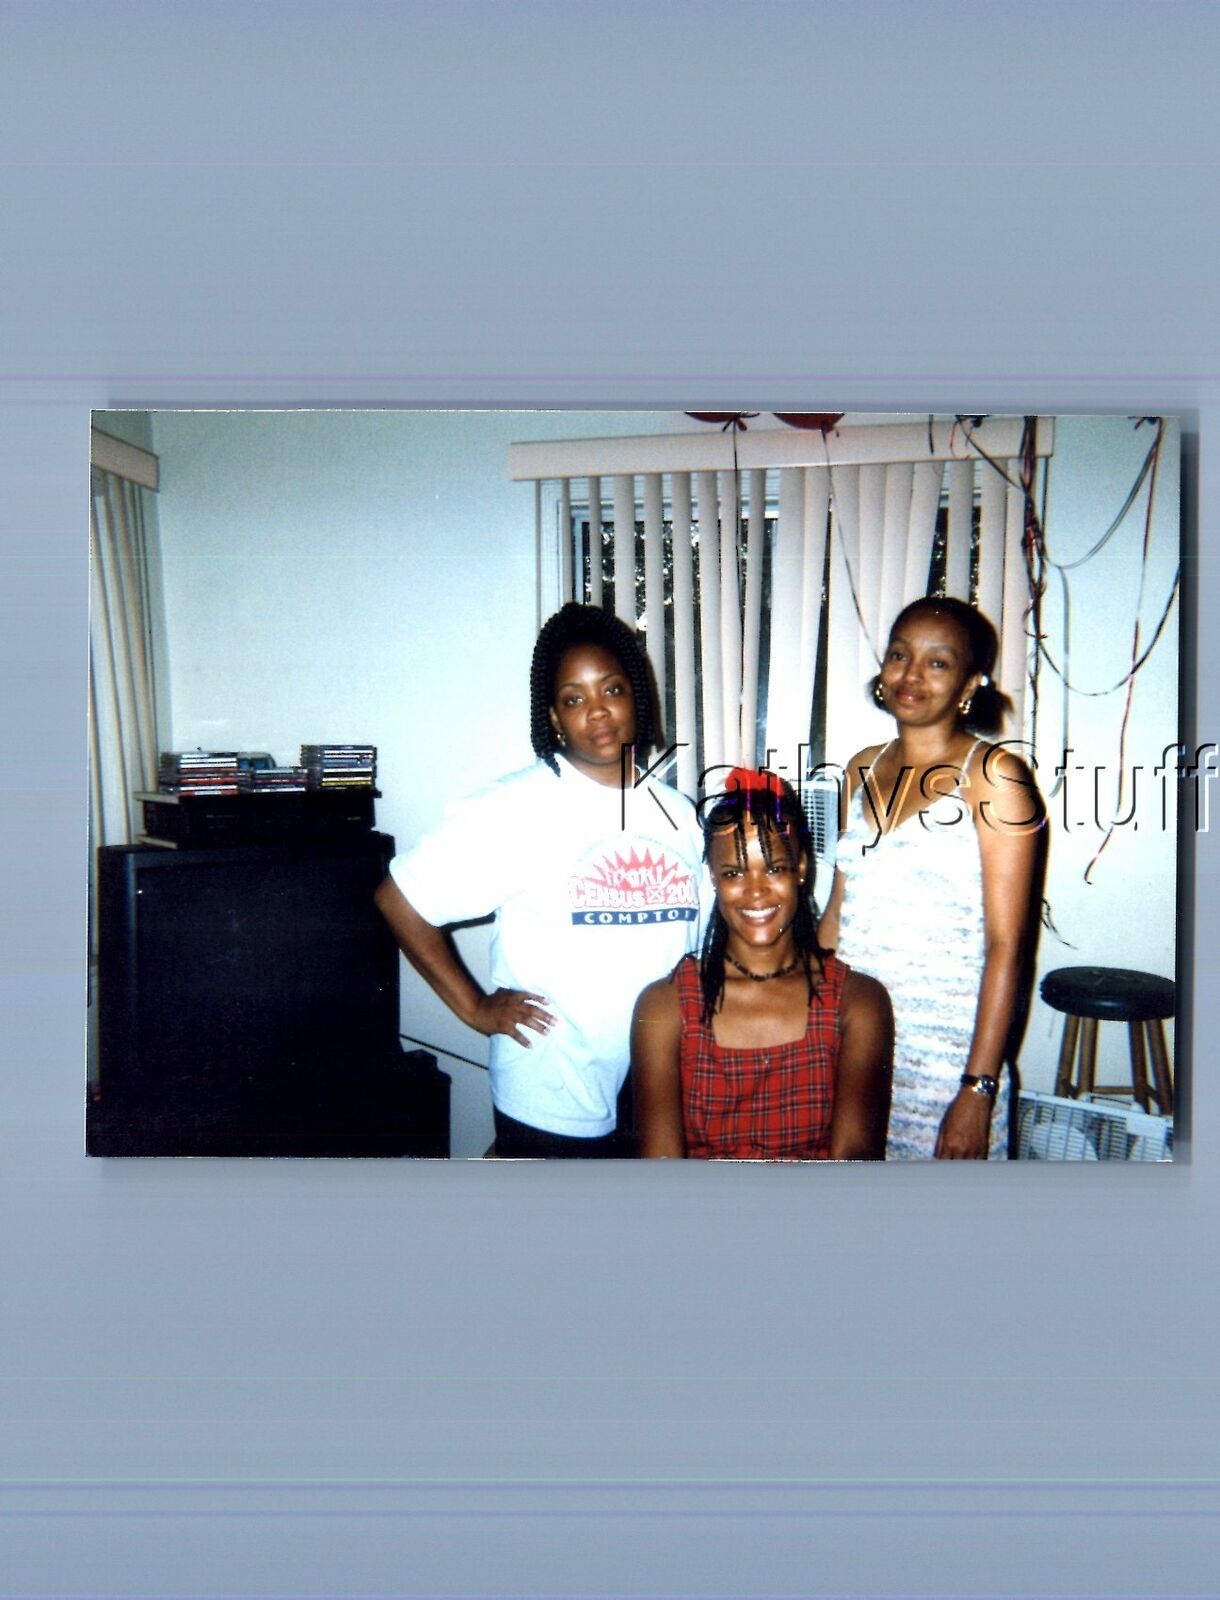 Found Color Photo Y+2565 Pretty Black Women Posed Smiling